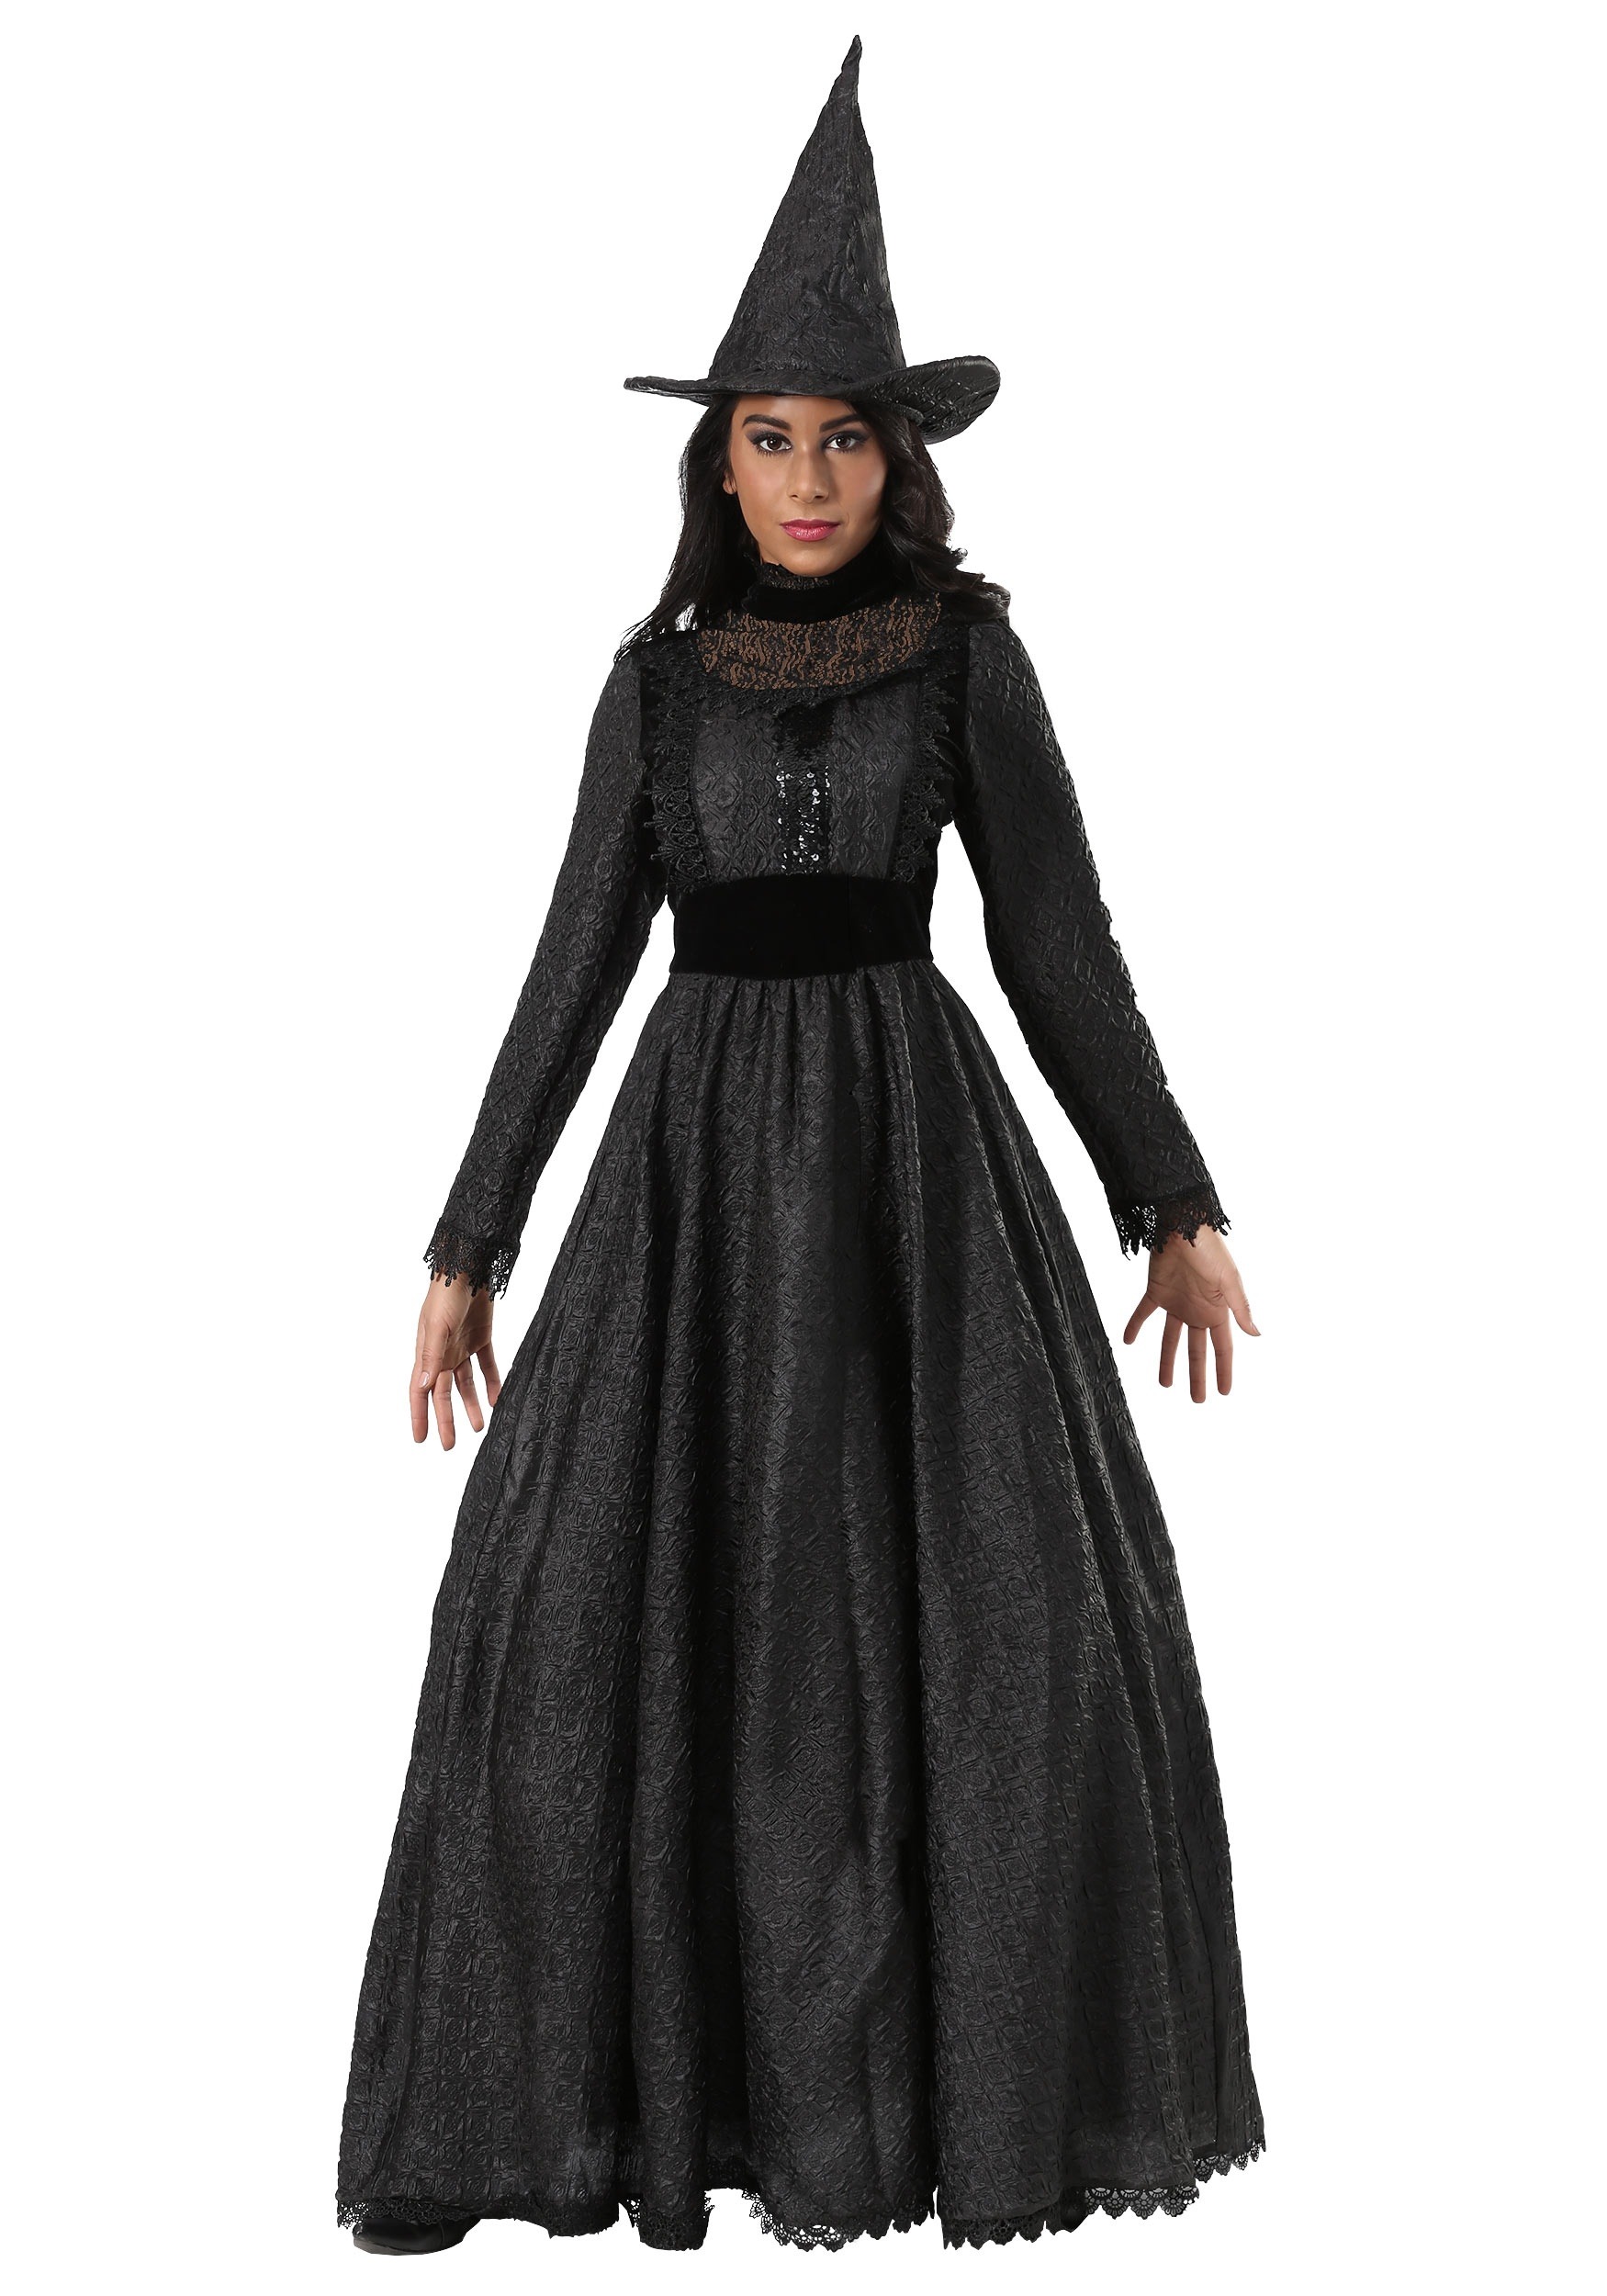 Photos - Fancy Dress Deluxe FUN Costumes Plus Size  Wicked Witch Costume Black FUN6695PL 